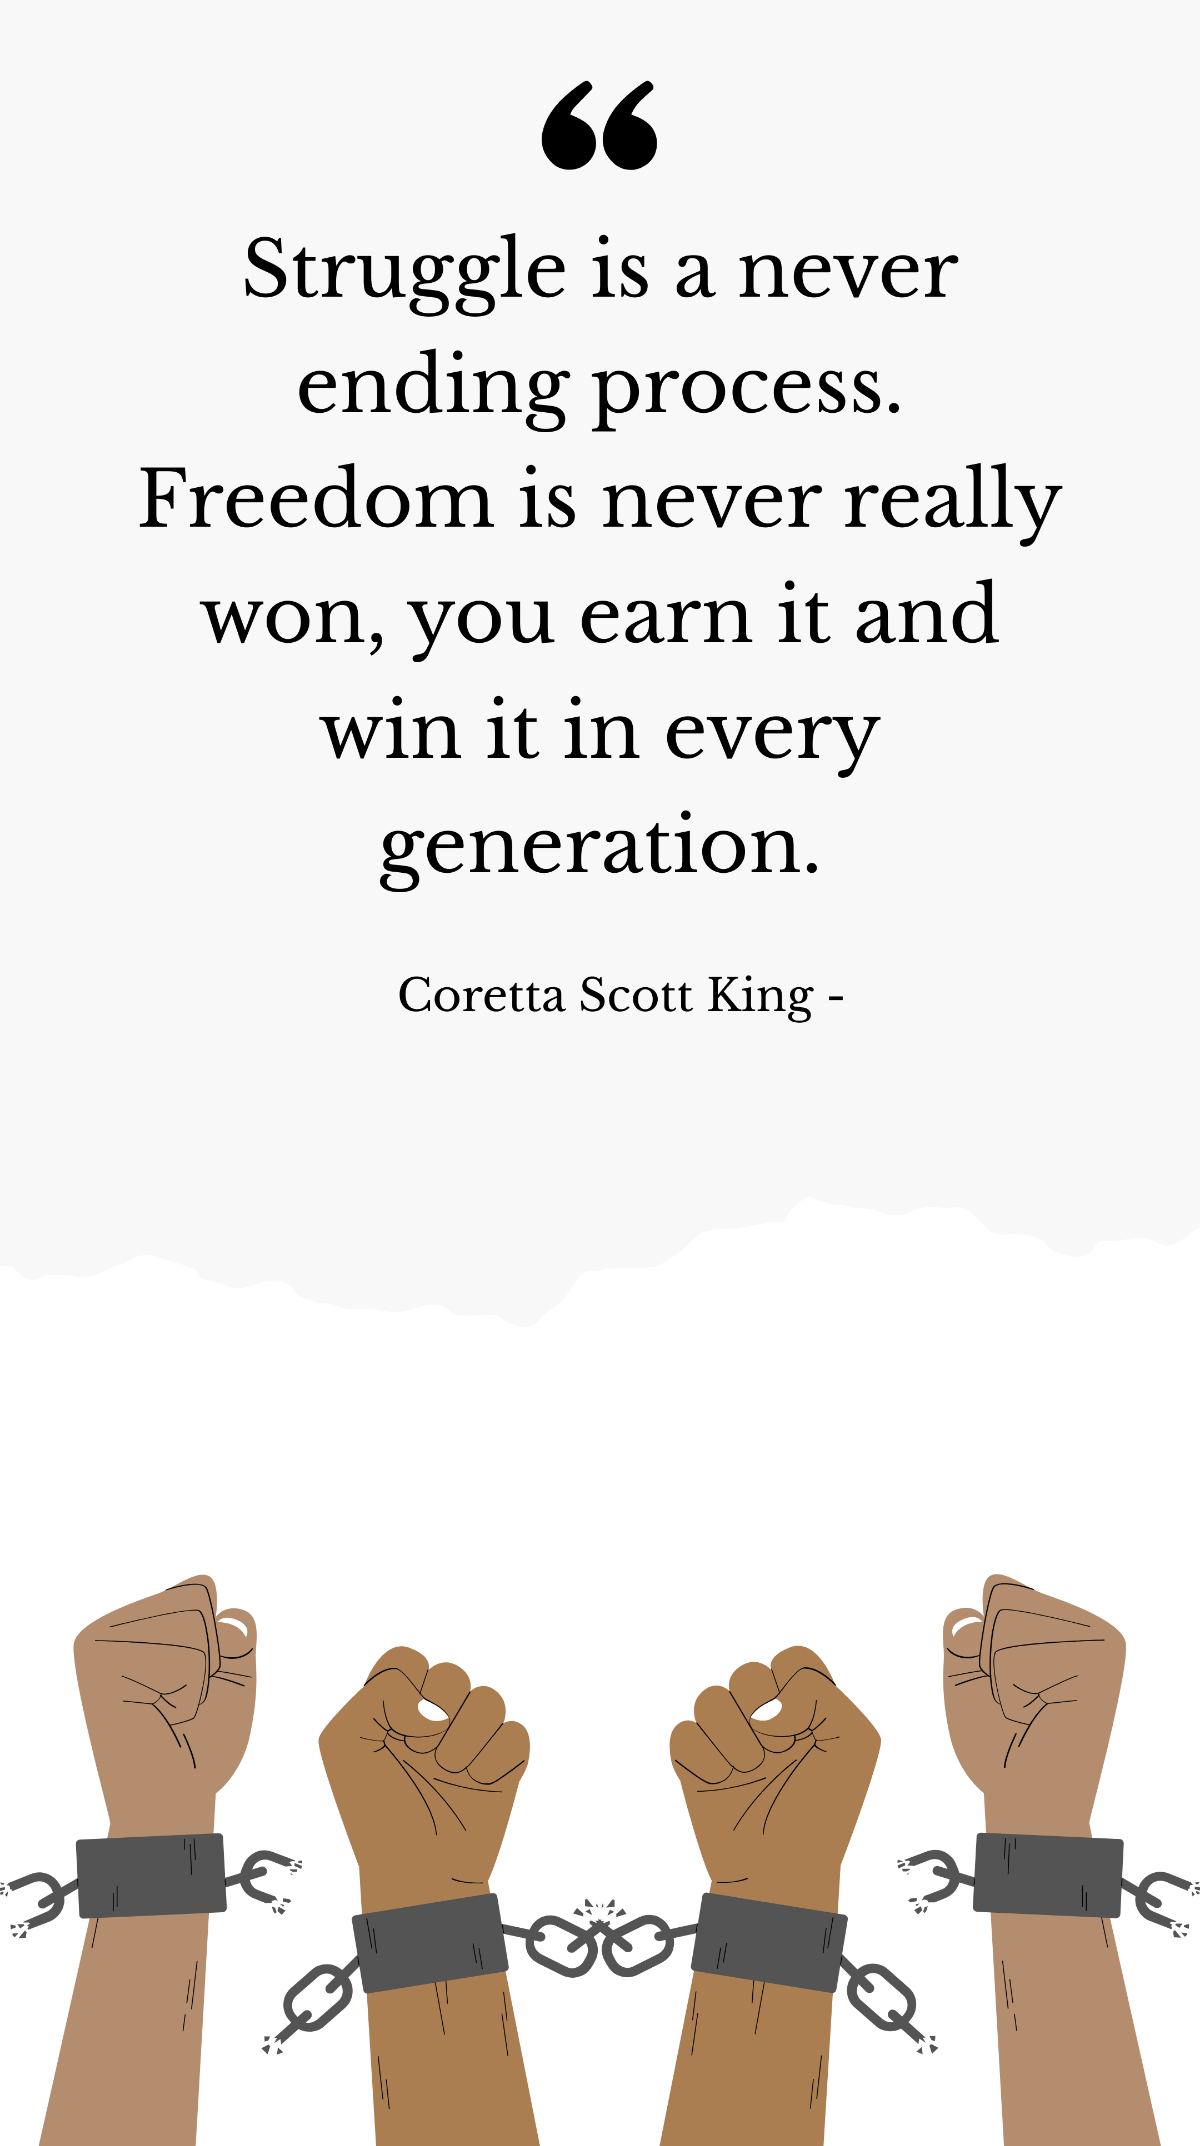 Coretta Scott King - Struggle is a never ending process. Freedom is never really won, you earn it and win it in every generation. Template